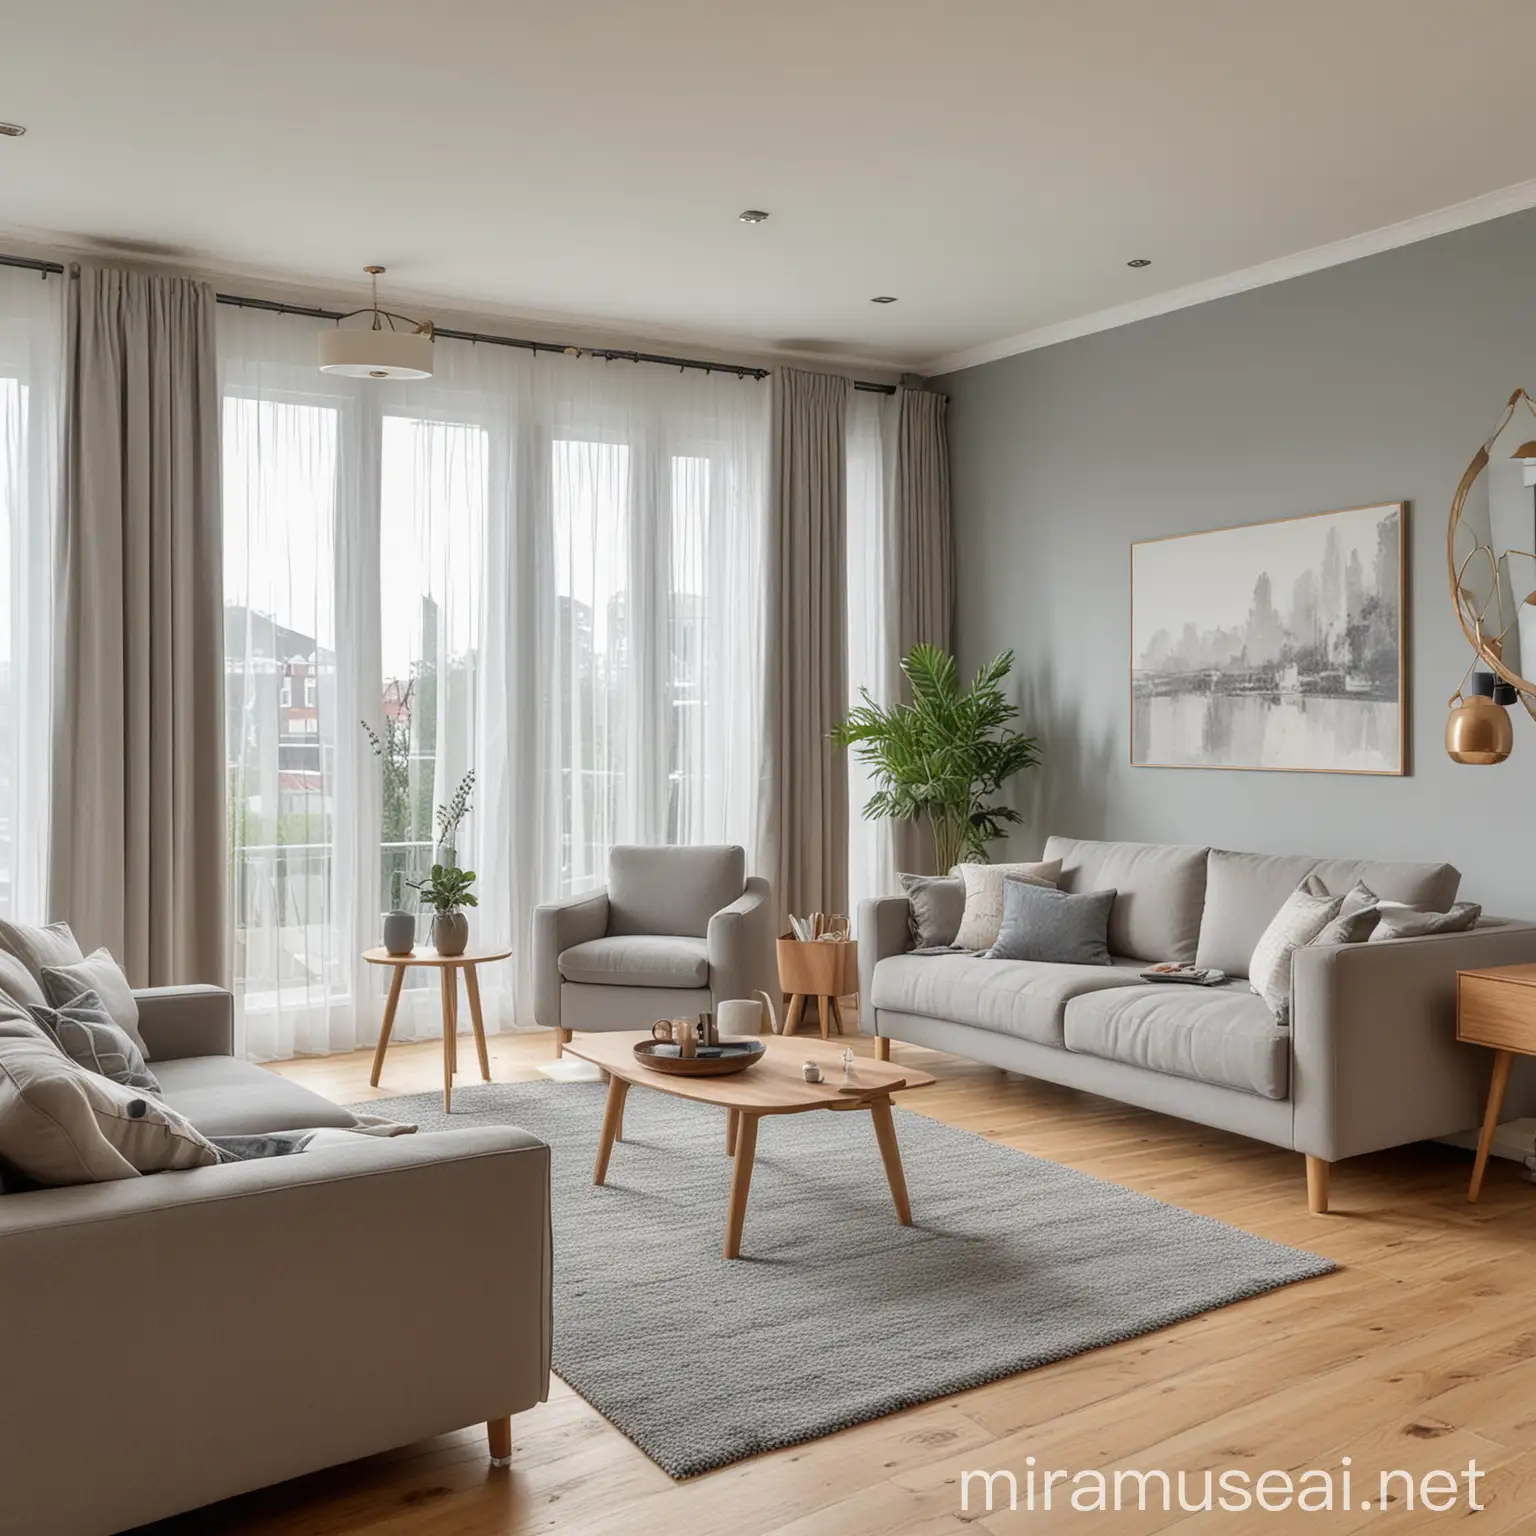 Contemporary Living Room Interior with Stylish Furnishings and Neutral Color Palette